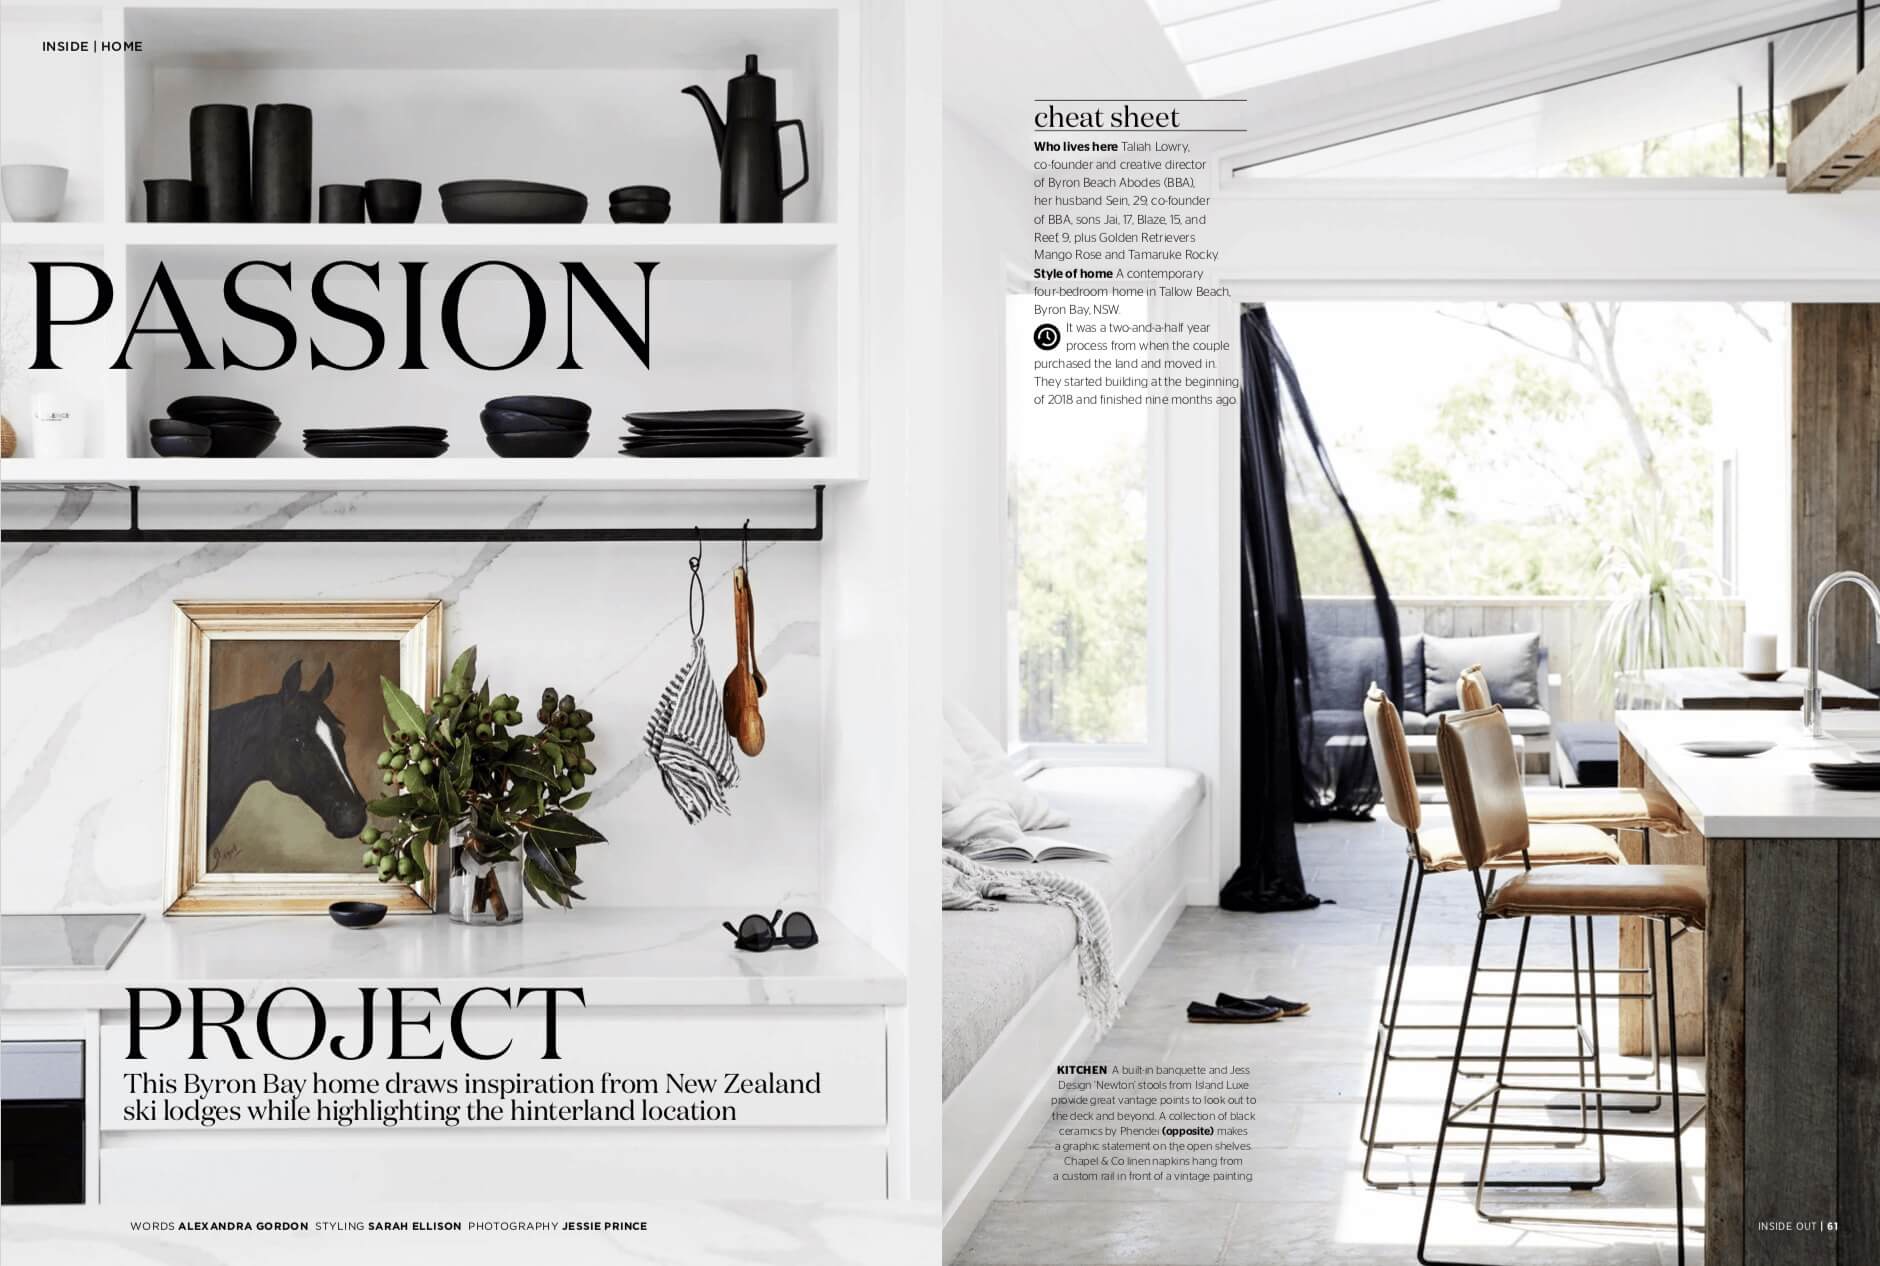 The Lodge, Byron Beach Abodes in Inside Out Magazine